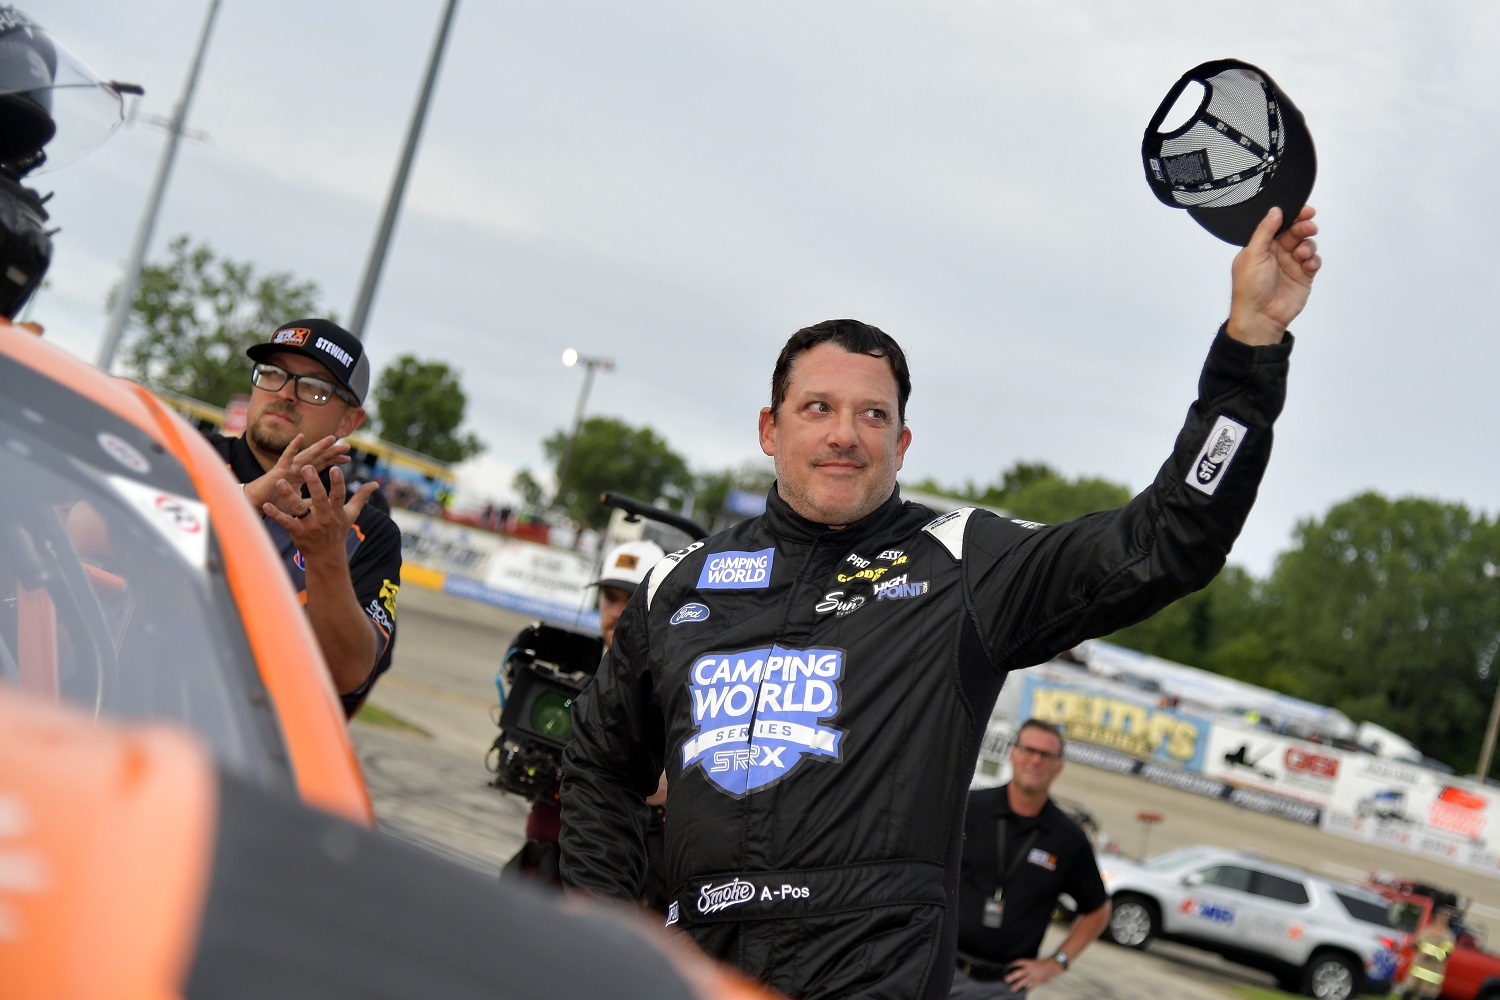 Tony Stewart waves to fans before climbing into his car for the Superstar Racing Experience event at Slinger Speedway on July 10, 2021 in Slinger, Wisconsin.